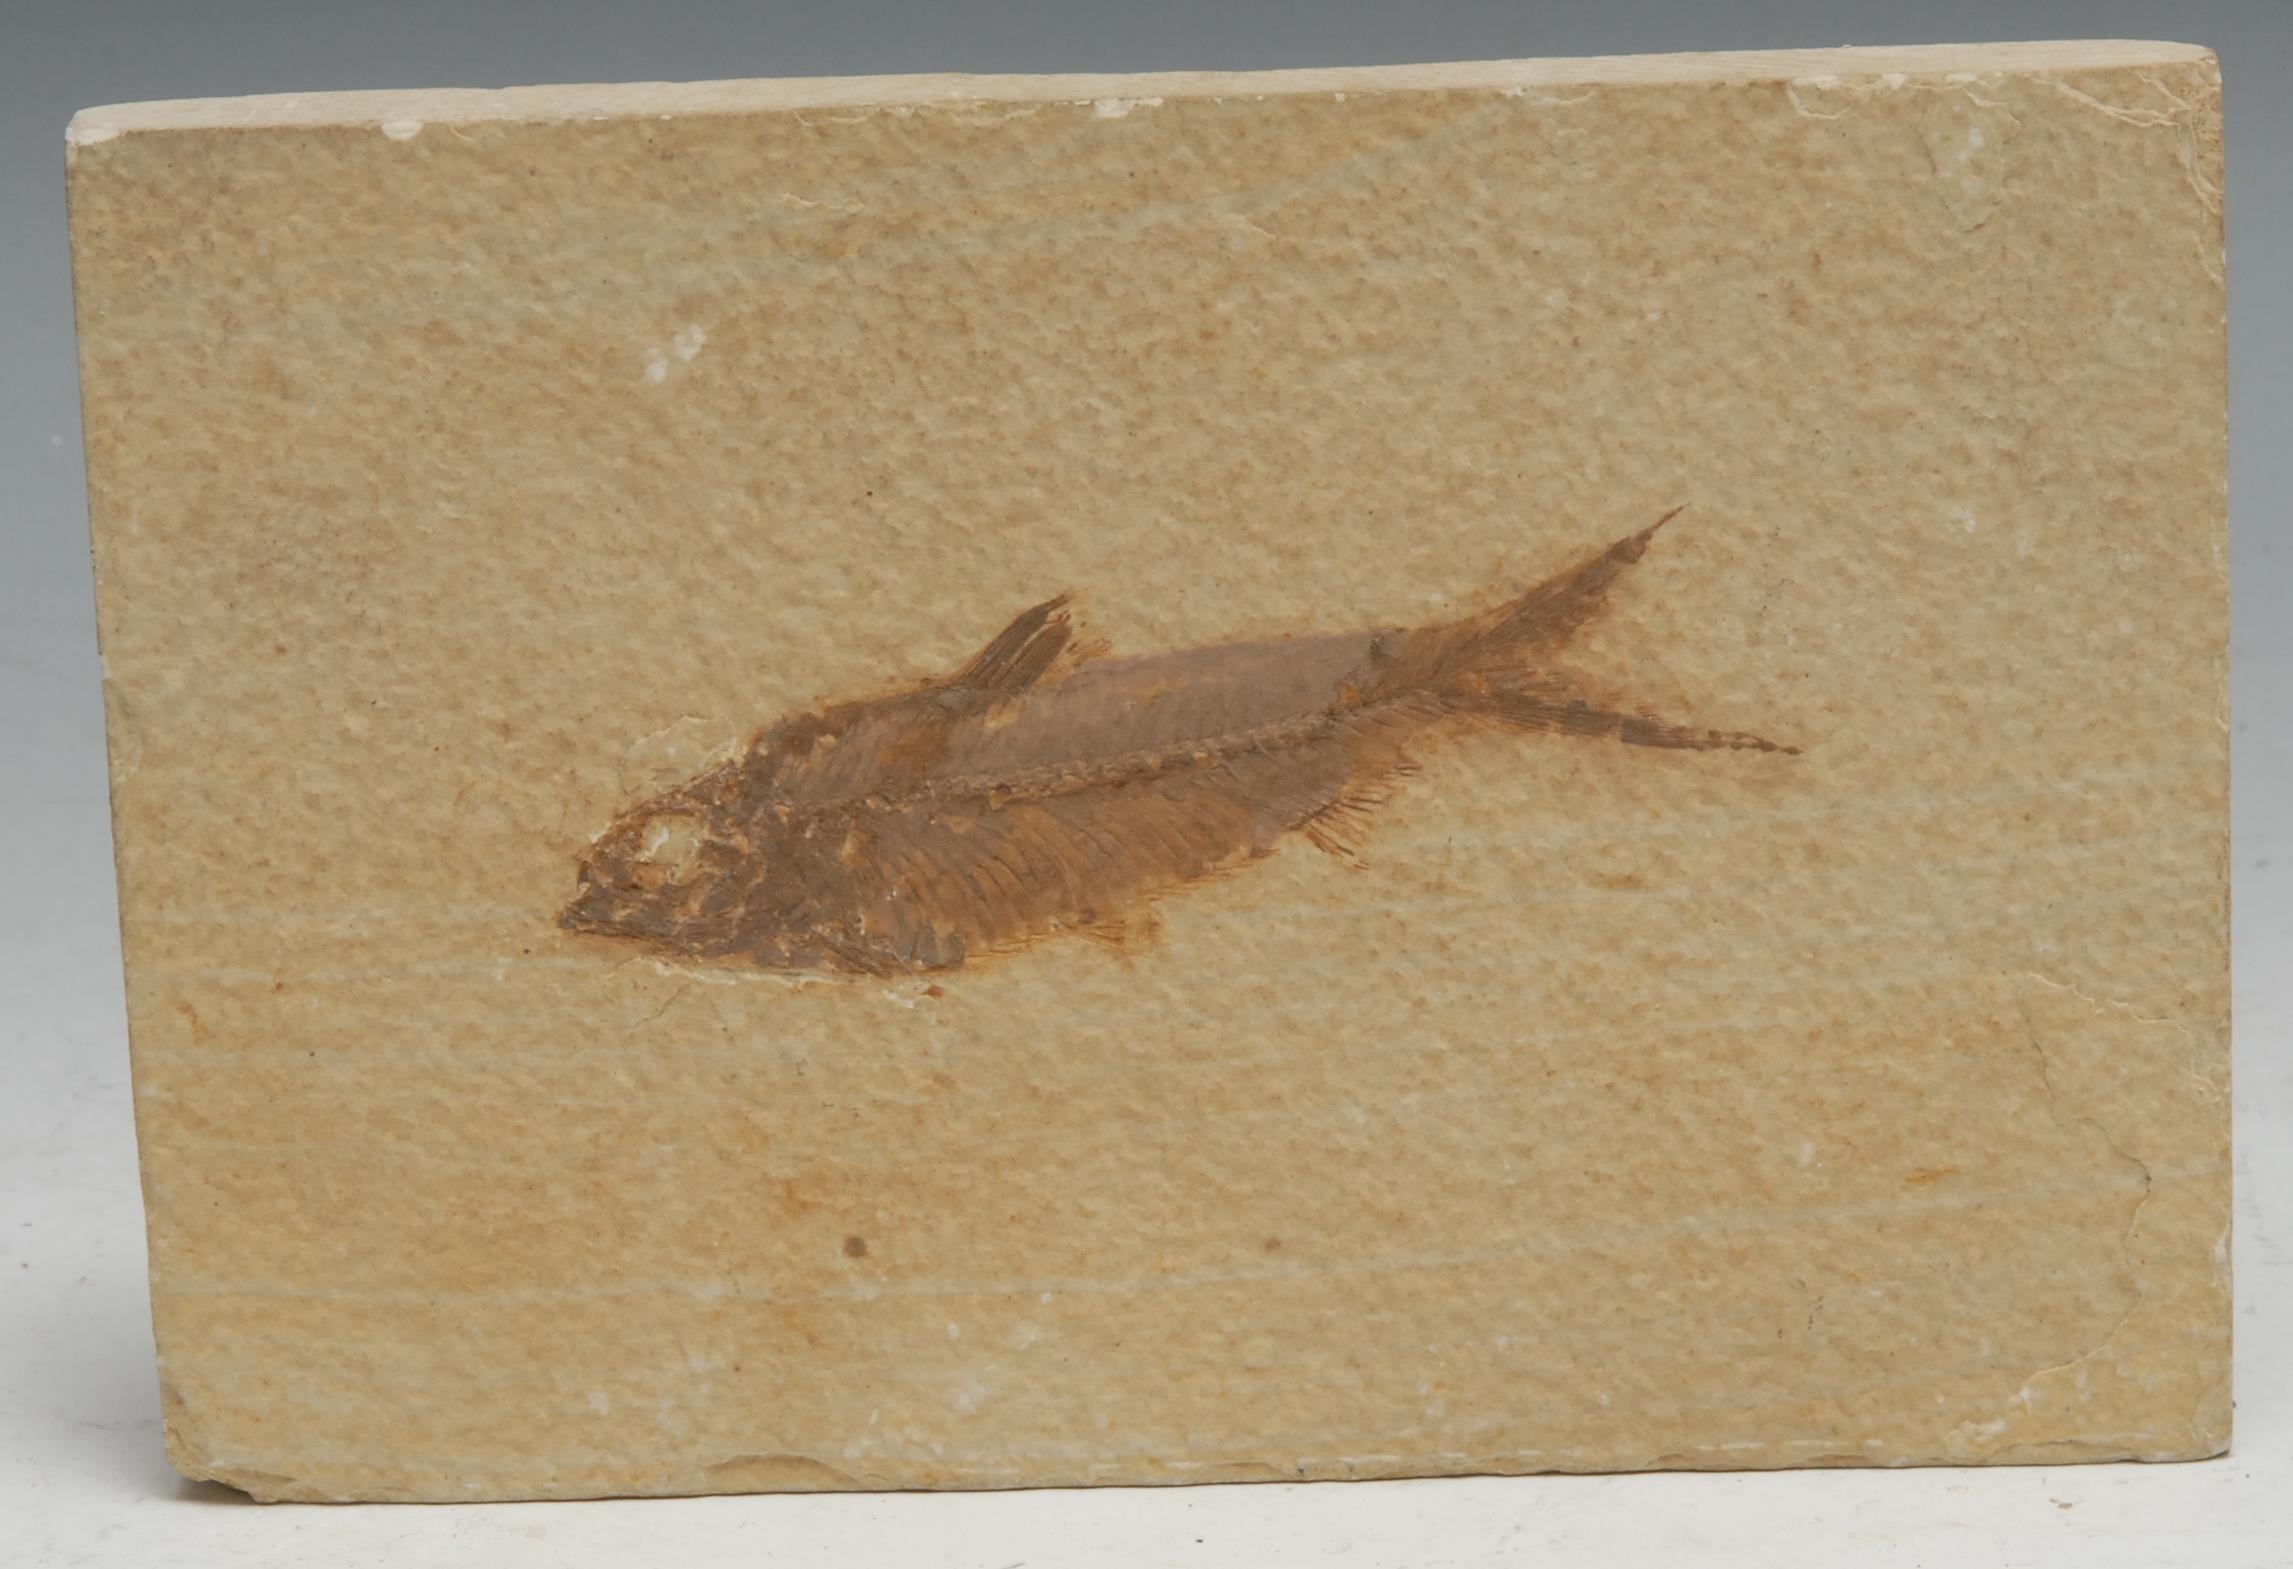 Palaeontology - a fish fossil, probably Cretaceous period, the matrix 10.5cm x 15.5cm overall